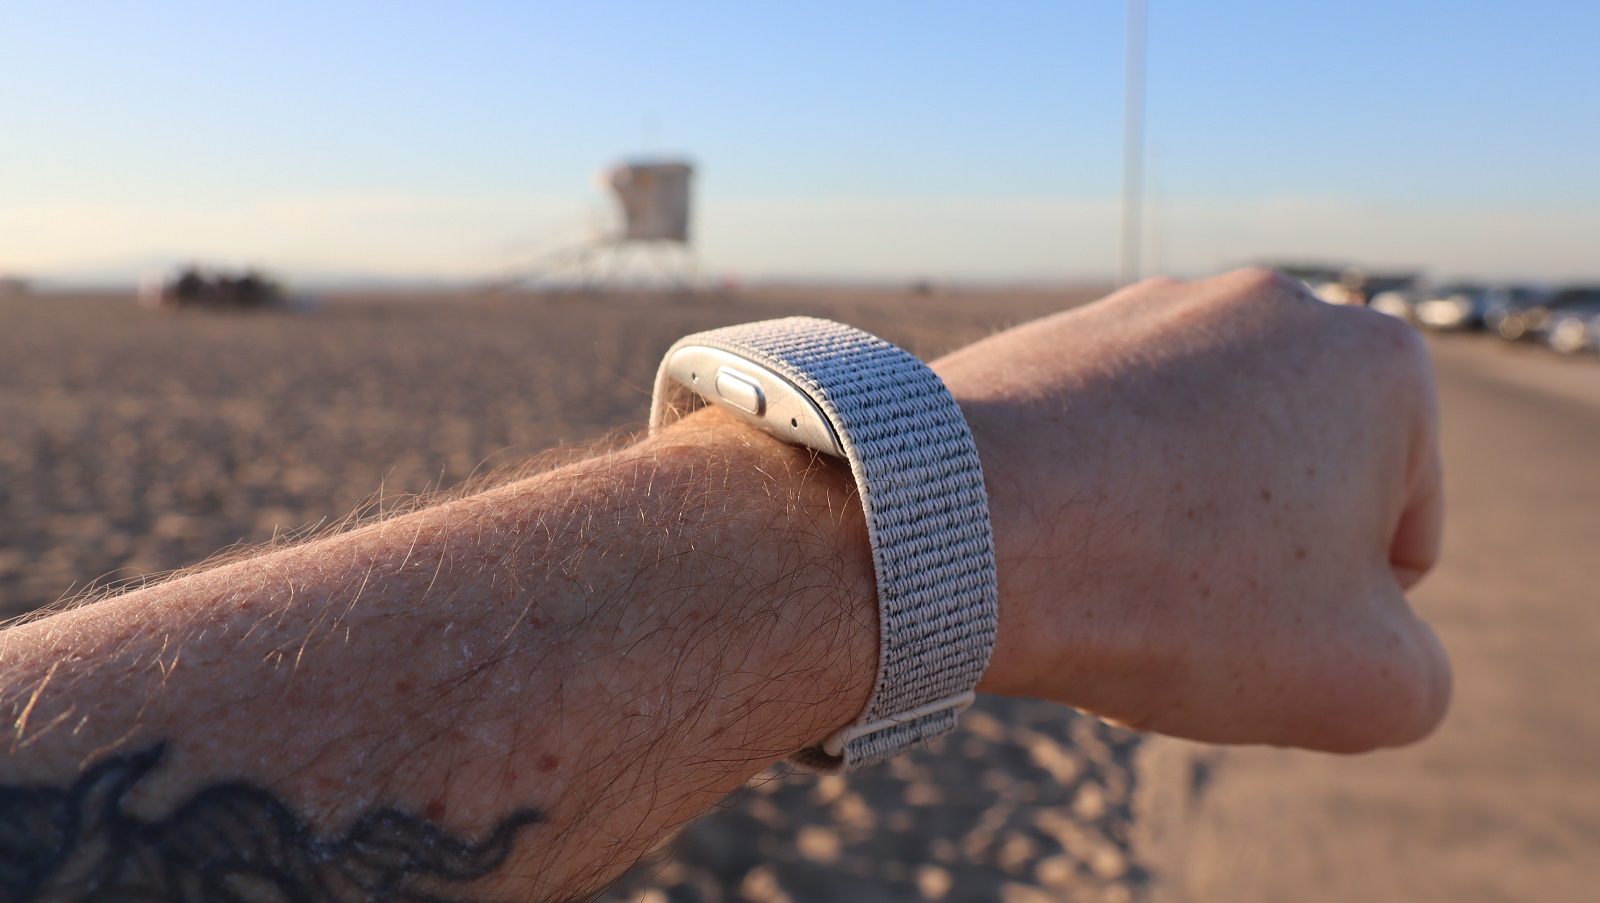 Halo Fitness Tracker Review: It Teaches You How to Be Nicer (Kinda)